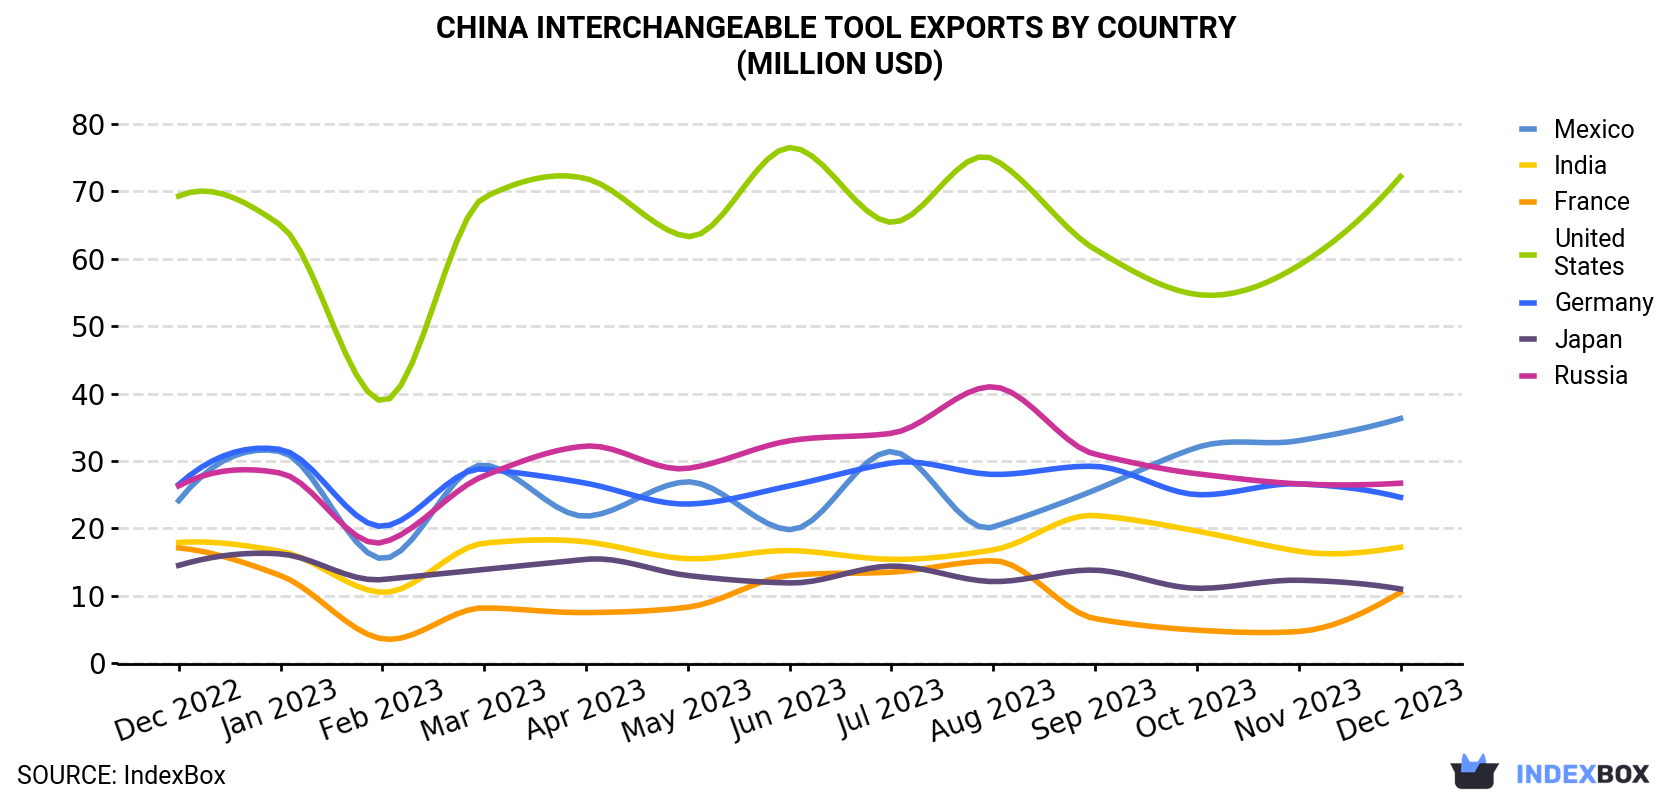 China Interchangeable Tool Exports By Country (Million USD)